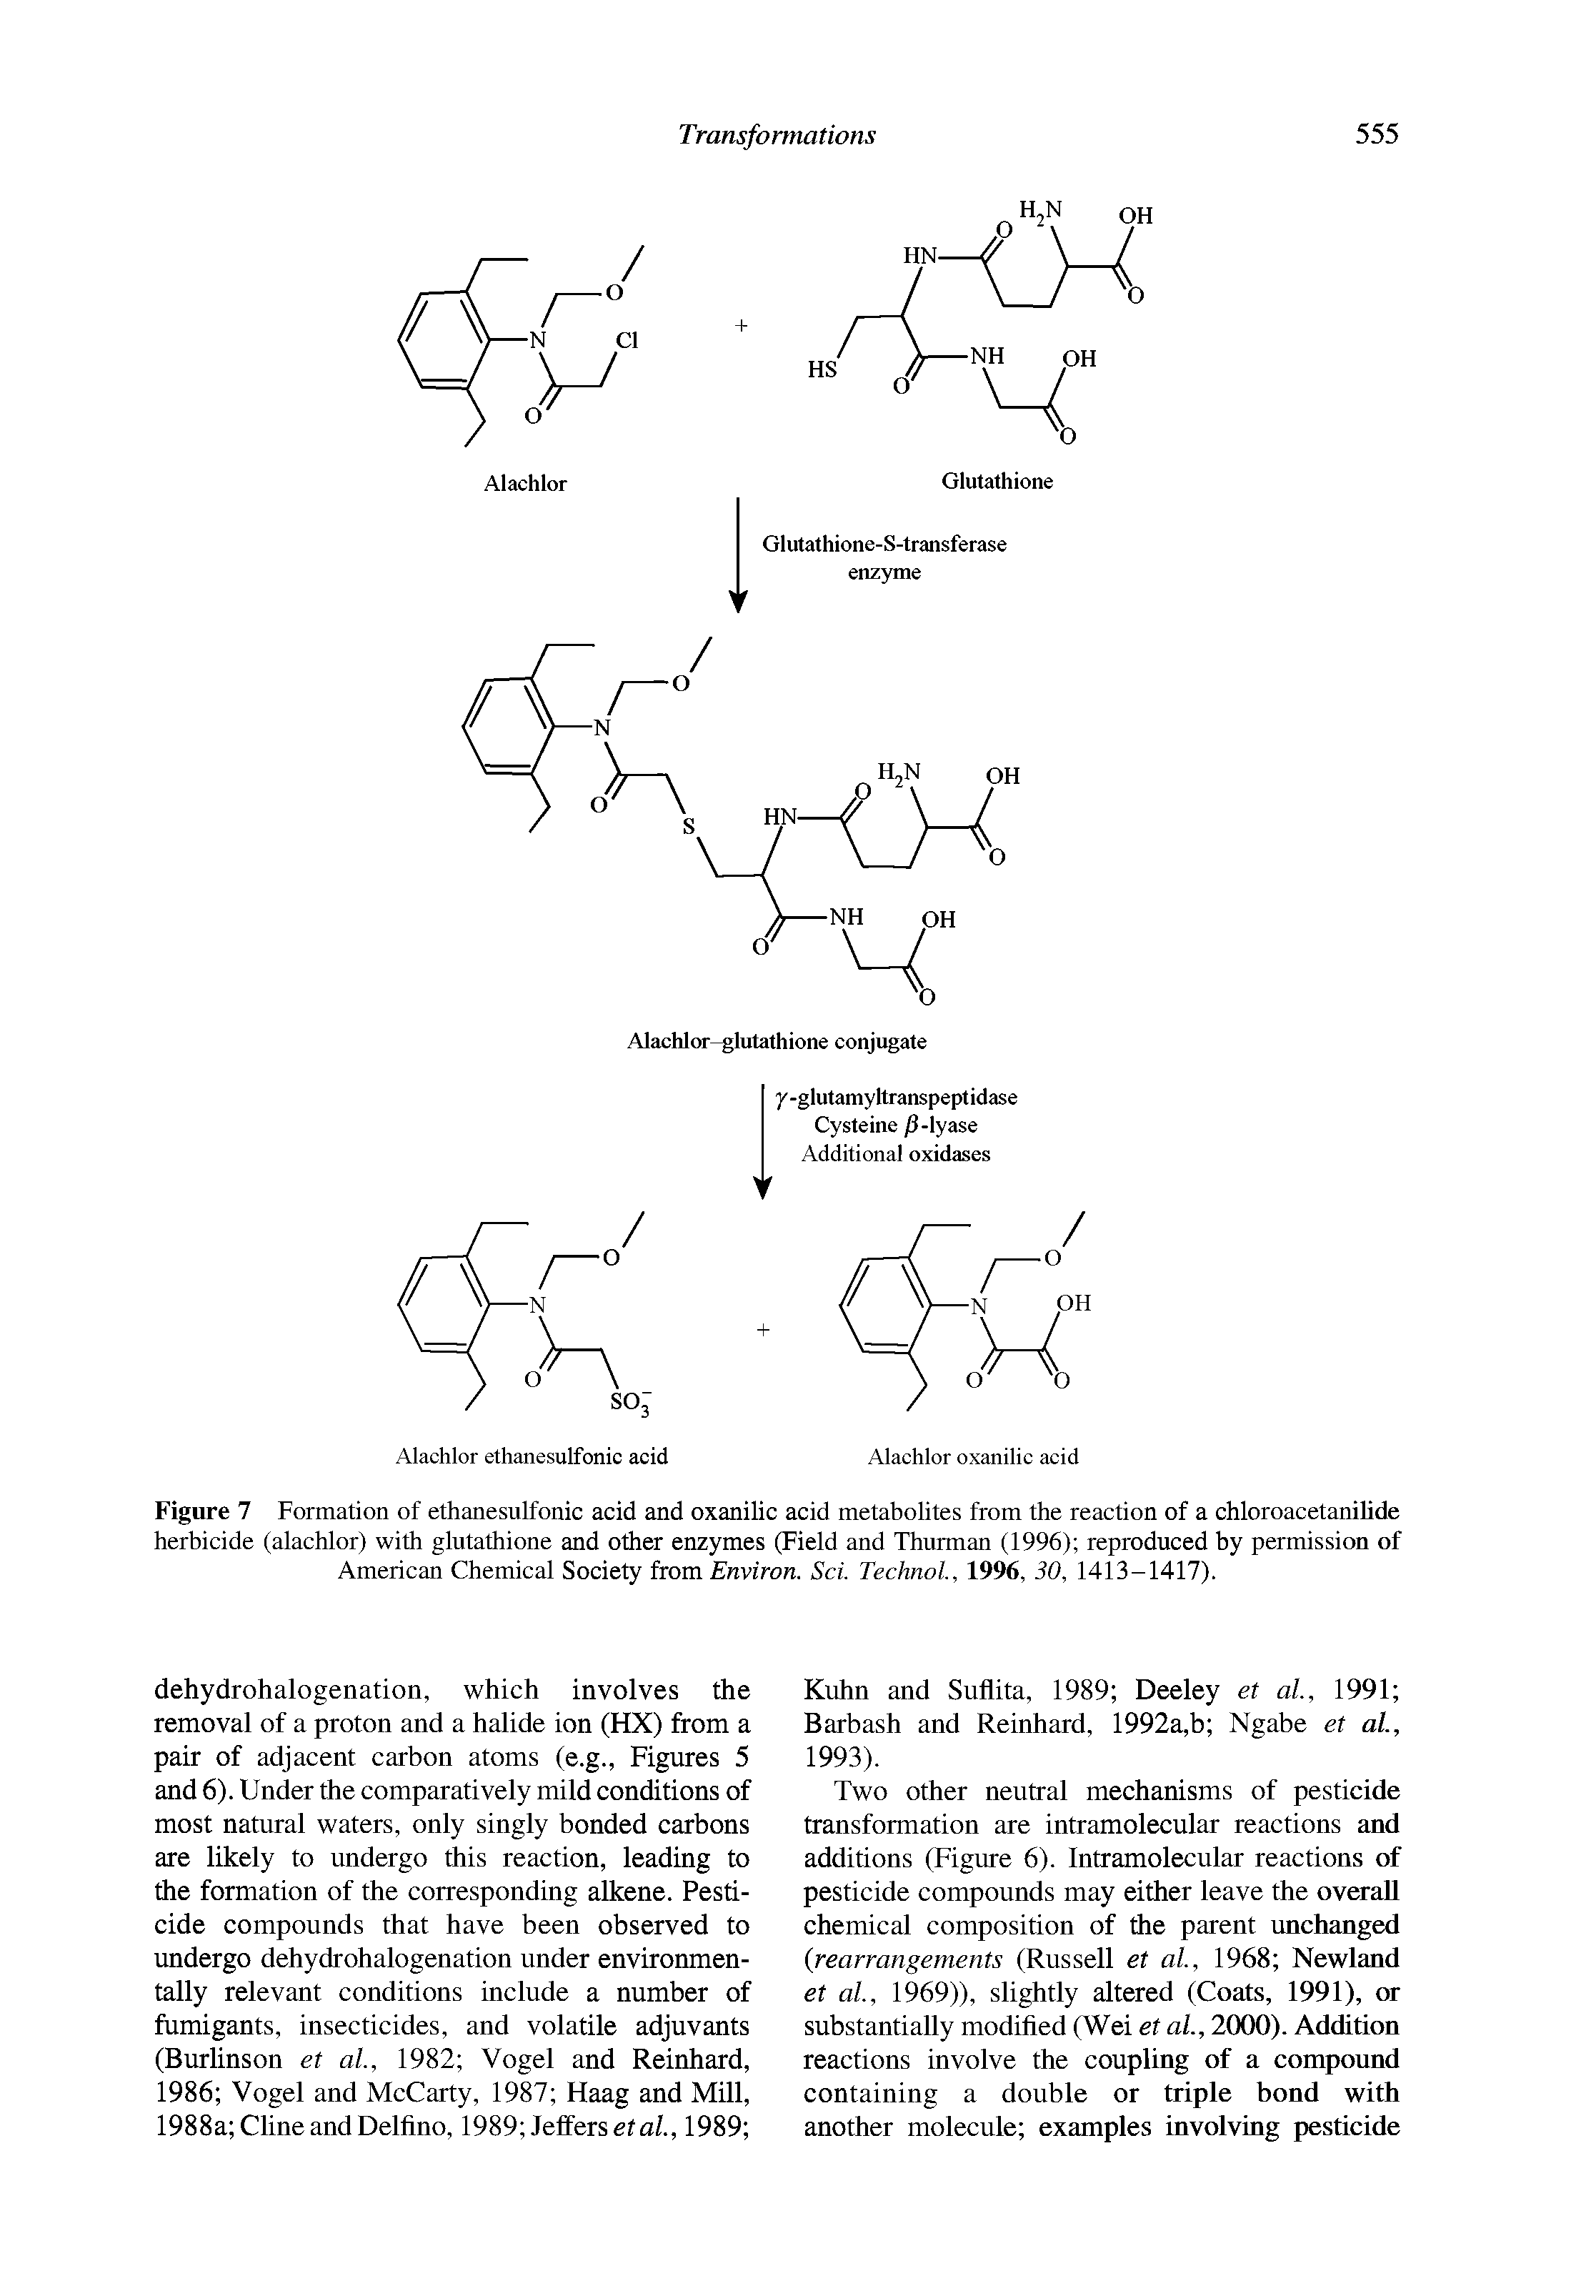 Figure 7 Formation of ethanesulfonic acid and oxanilic acid metabolites from the reaction of a chloroacetanilide herbicide (alachlor) with glutathione and other enzymes (Field and Thurman (1996) reproduced hy permission of American Chemical Society from Environ. Sci. Technol, 1996, 30, 1413-1417).